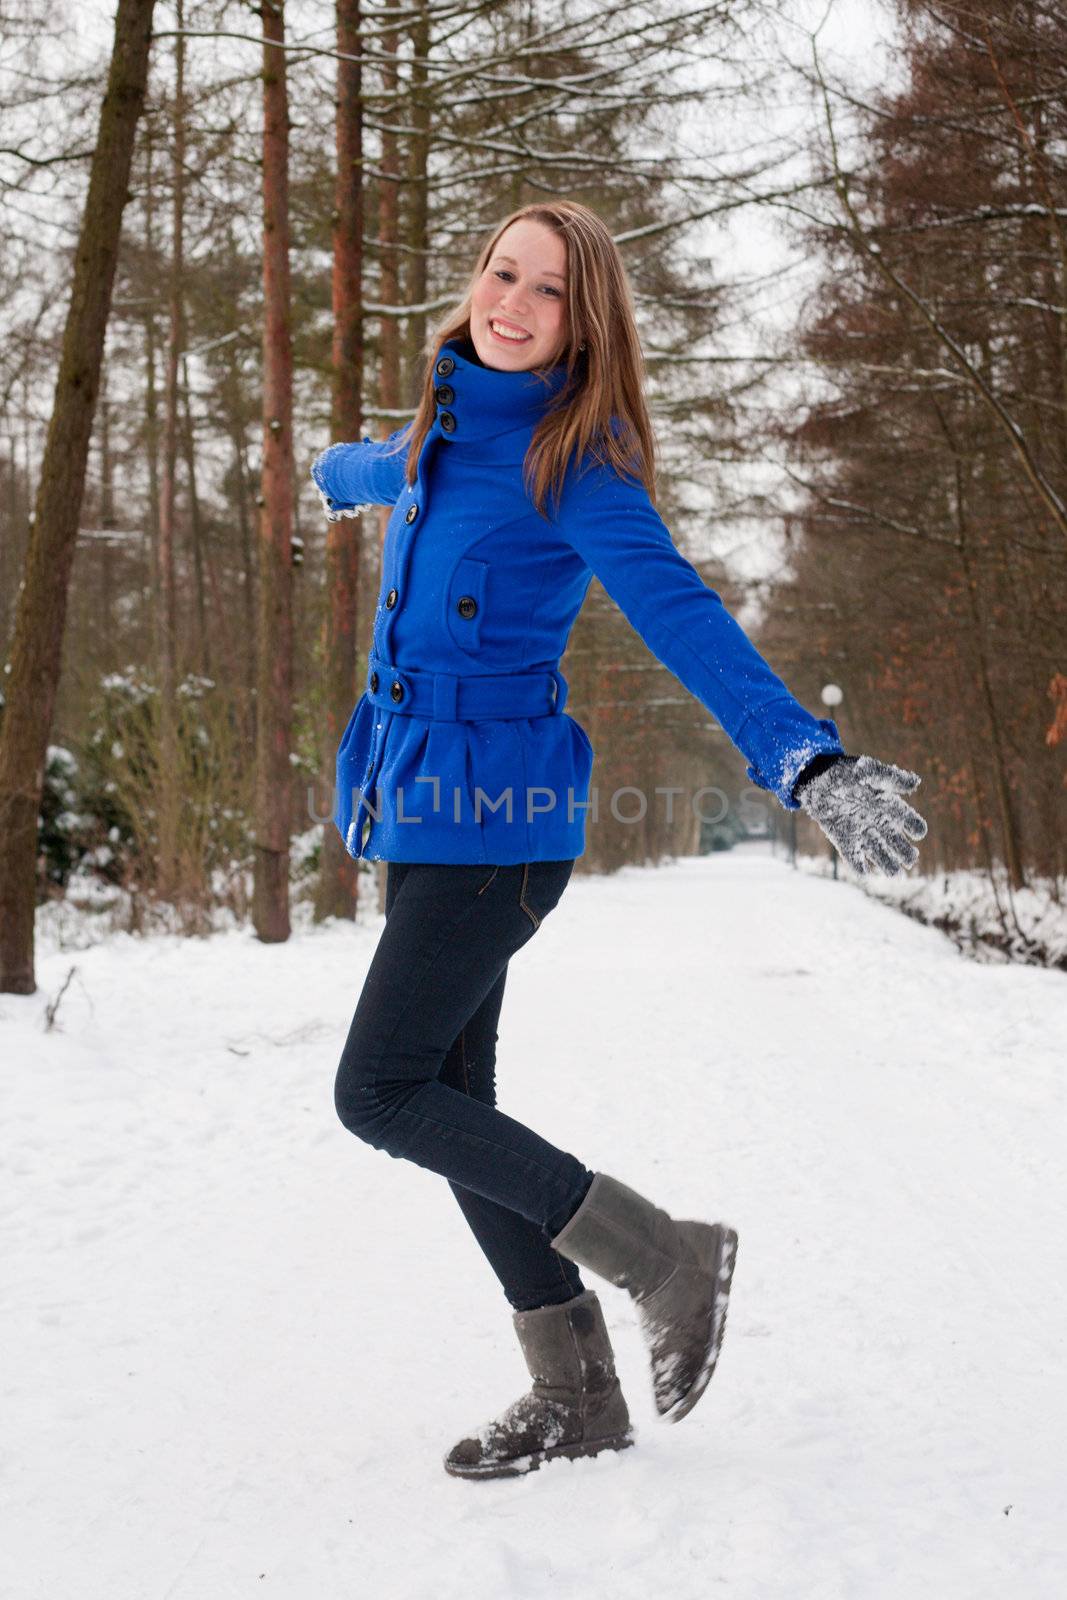 Cute girl posing silly on a snowy forest road